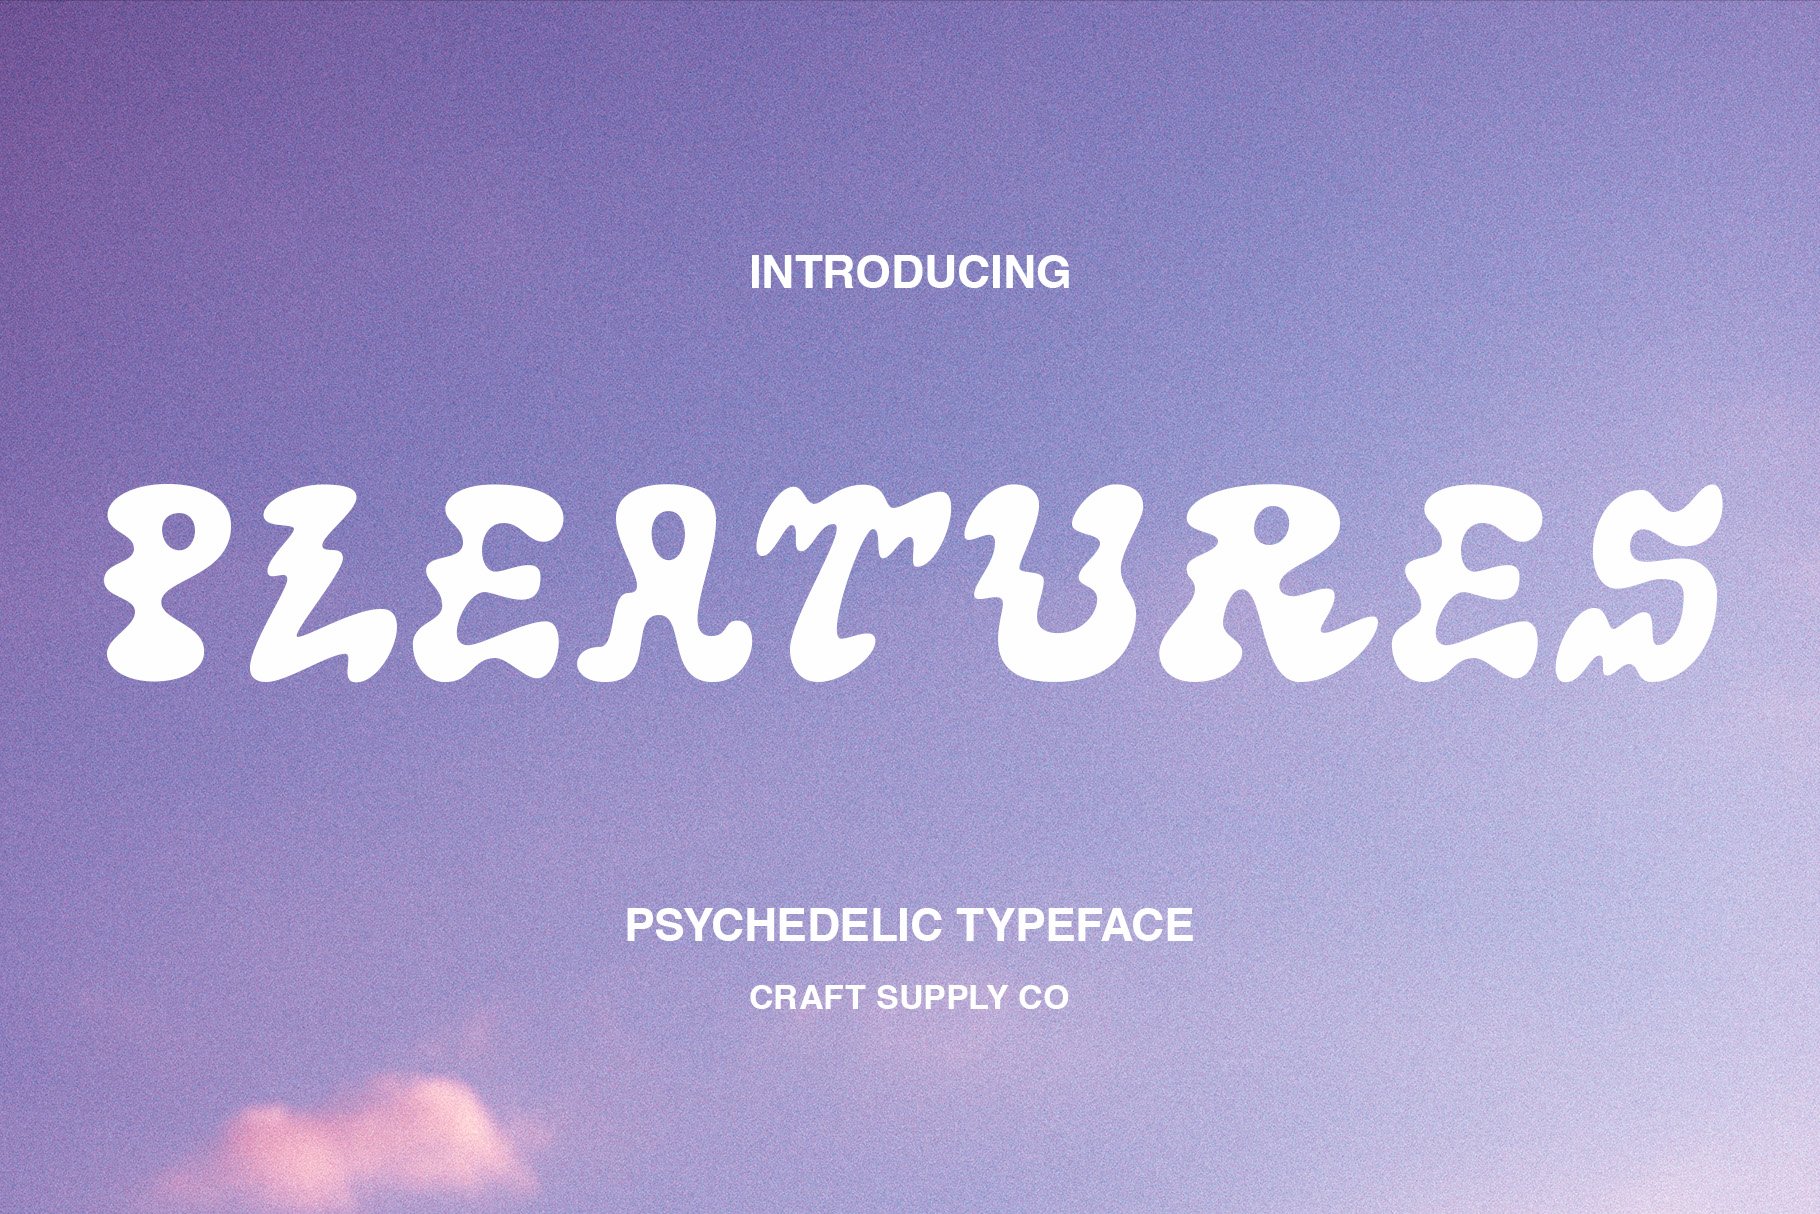 Pleatures - Psychedelic Typeface cover image.